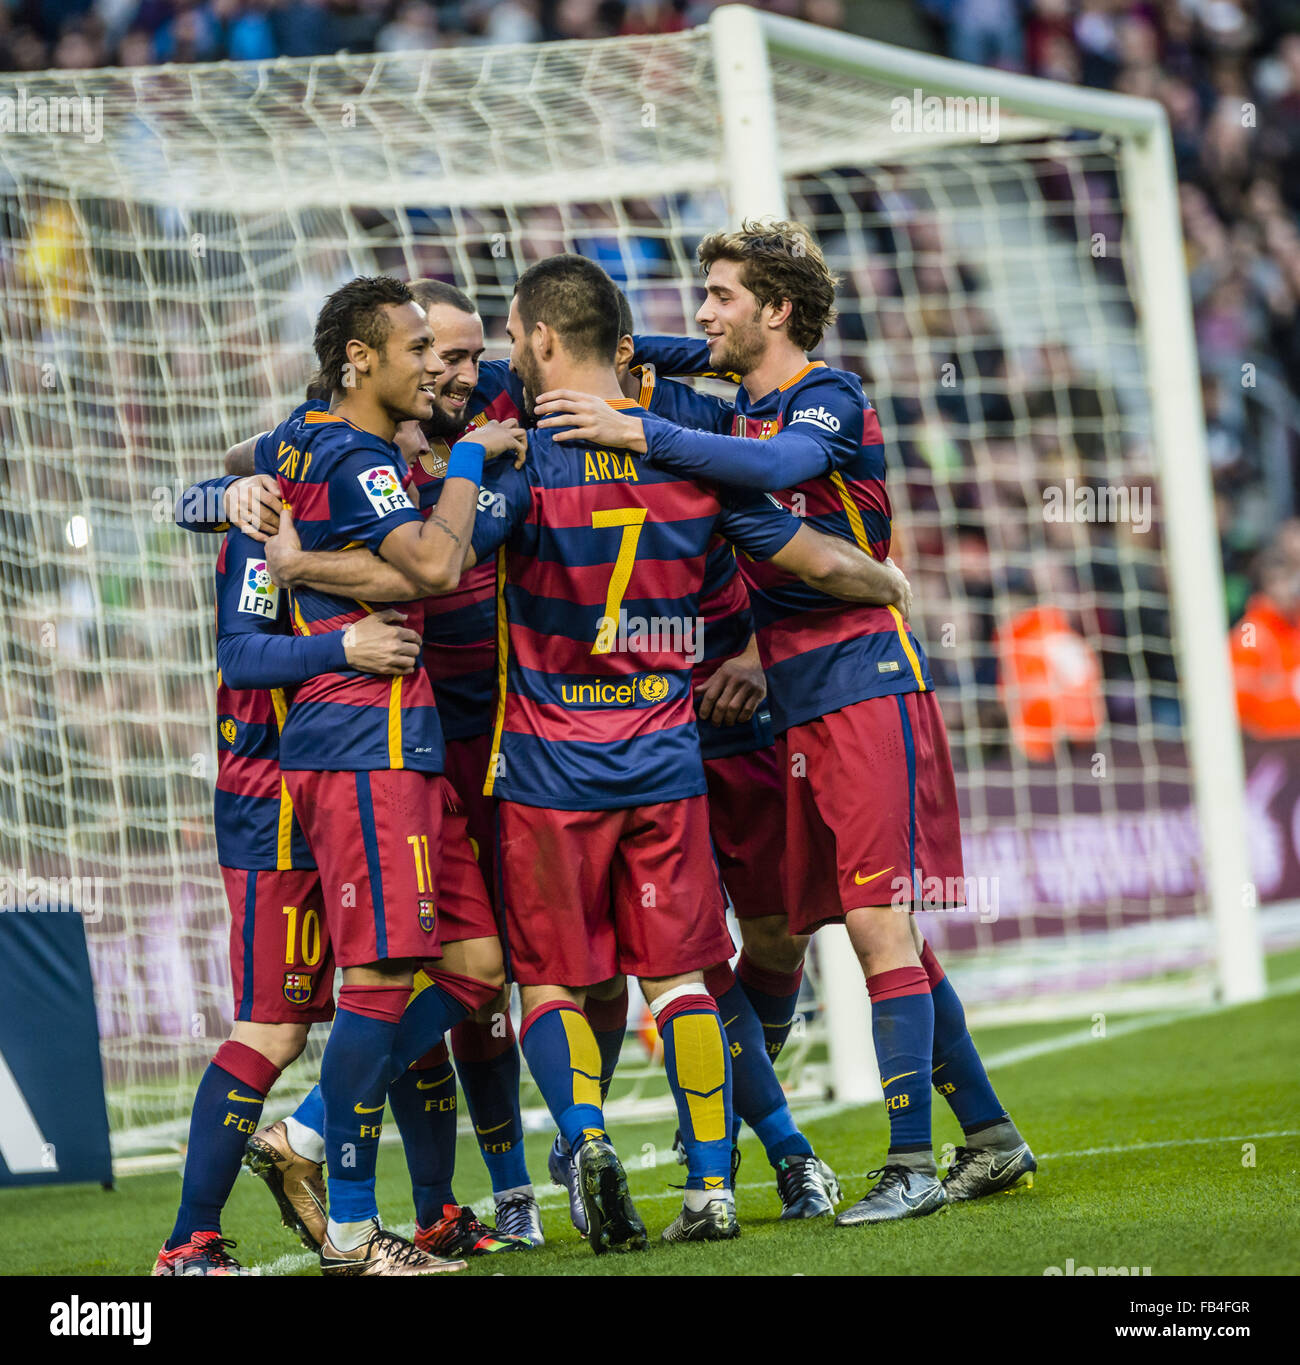 Barcelona, Catalonia, Spain. 9th Jan, 2016. FC Barcelona's forward MESSI celebrates a goal with teammates during the BBVA league match against Granada CF at the Camp Nou stadium in Barcelona Credit:  Matthias Oesterle/ZUMA Wire/Alamy Live News Stock Photo